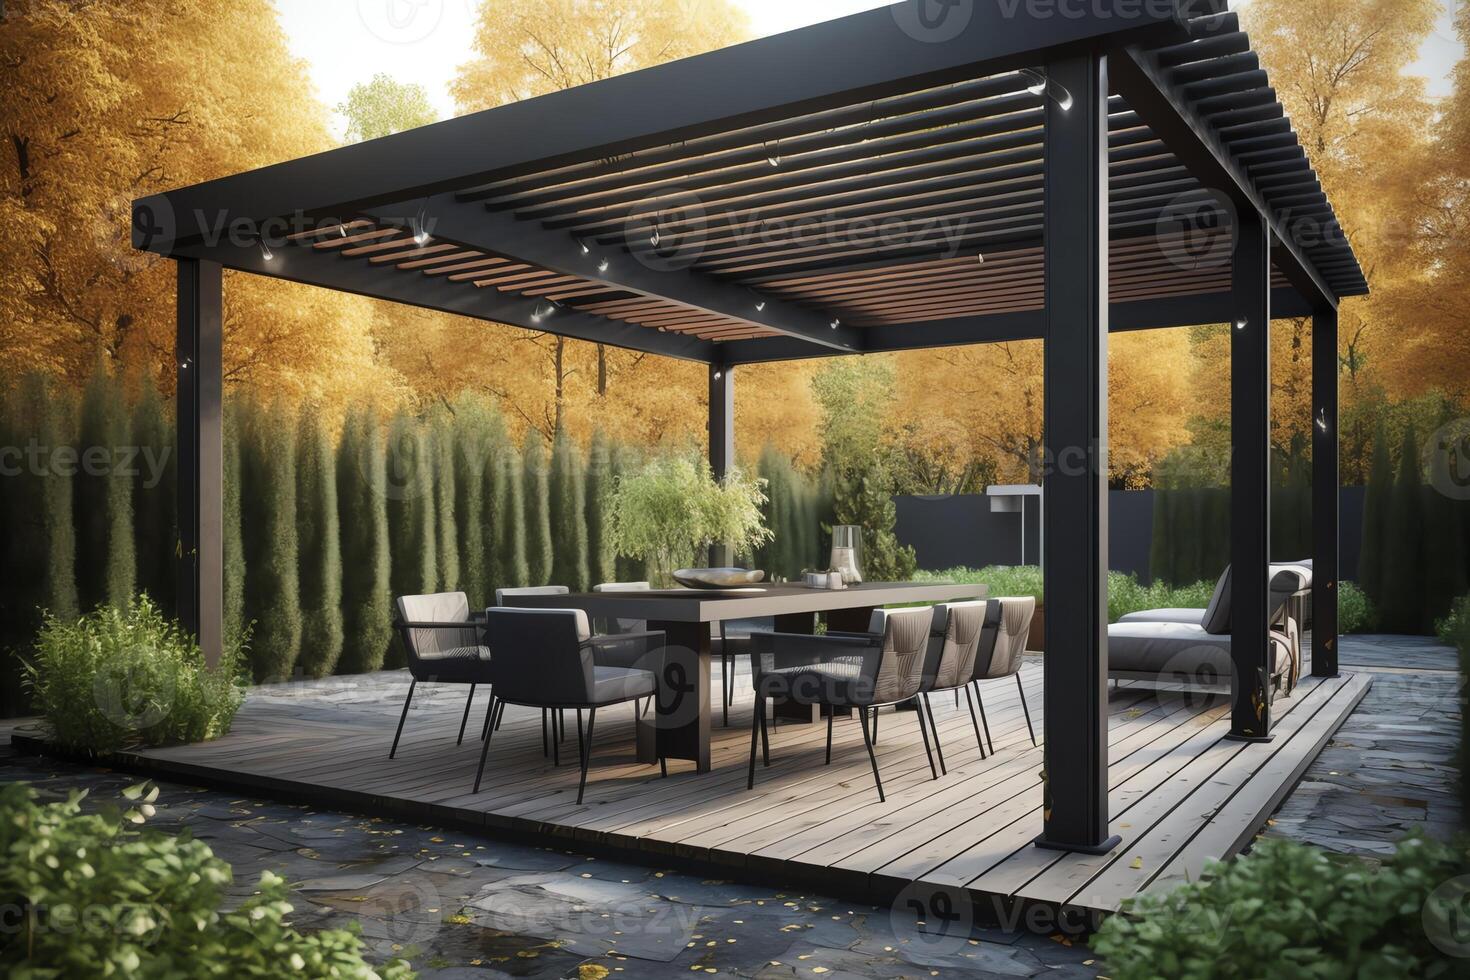 Modern patio furniture include a pergola shade structure an awning a patio roof a dining table seats and a metal grill. photo